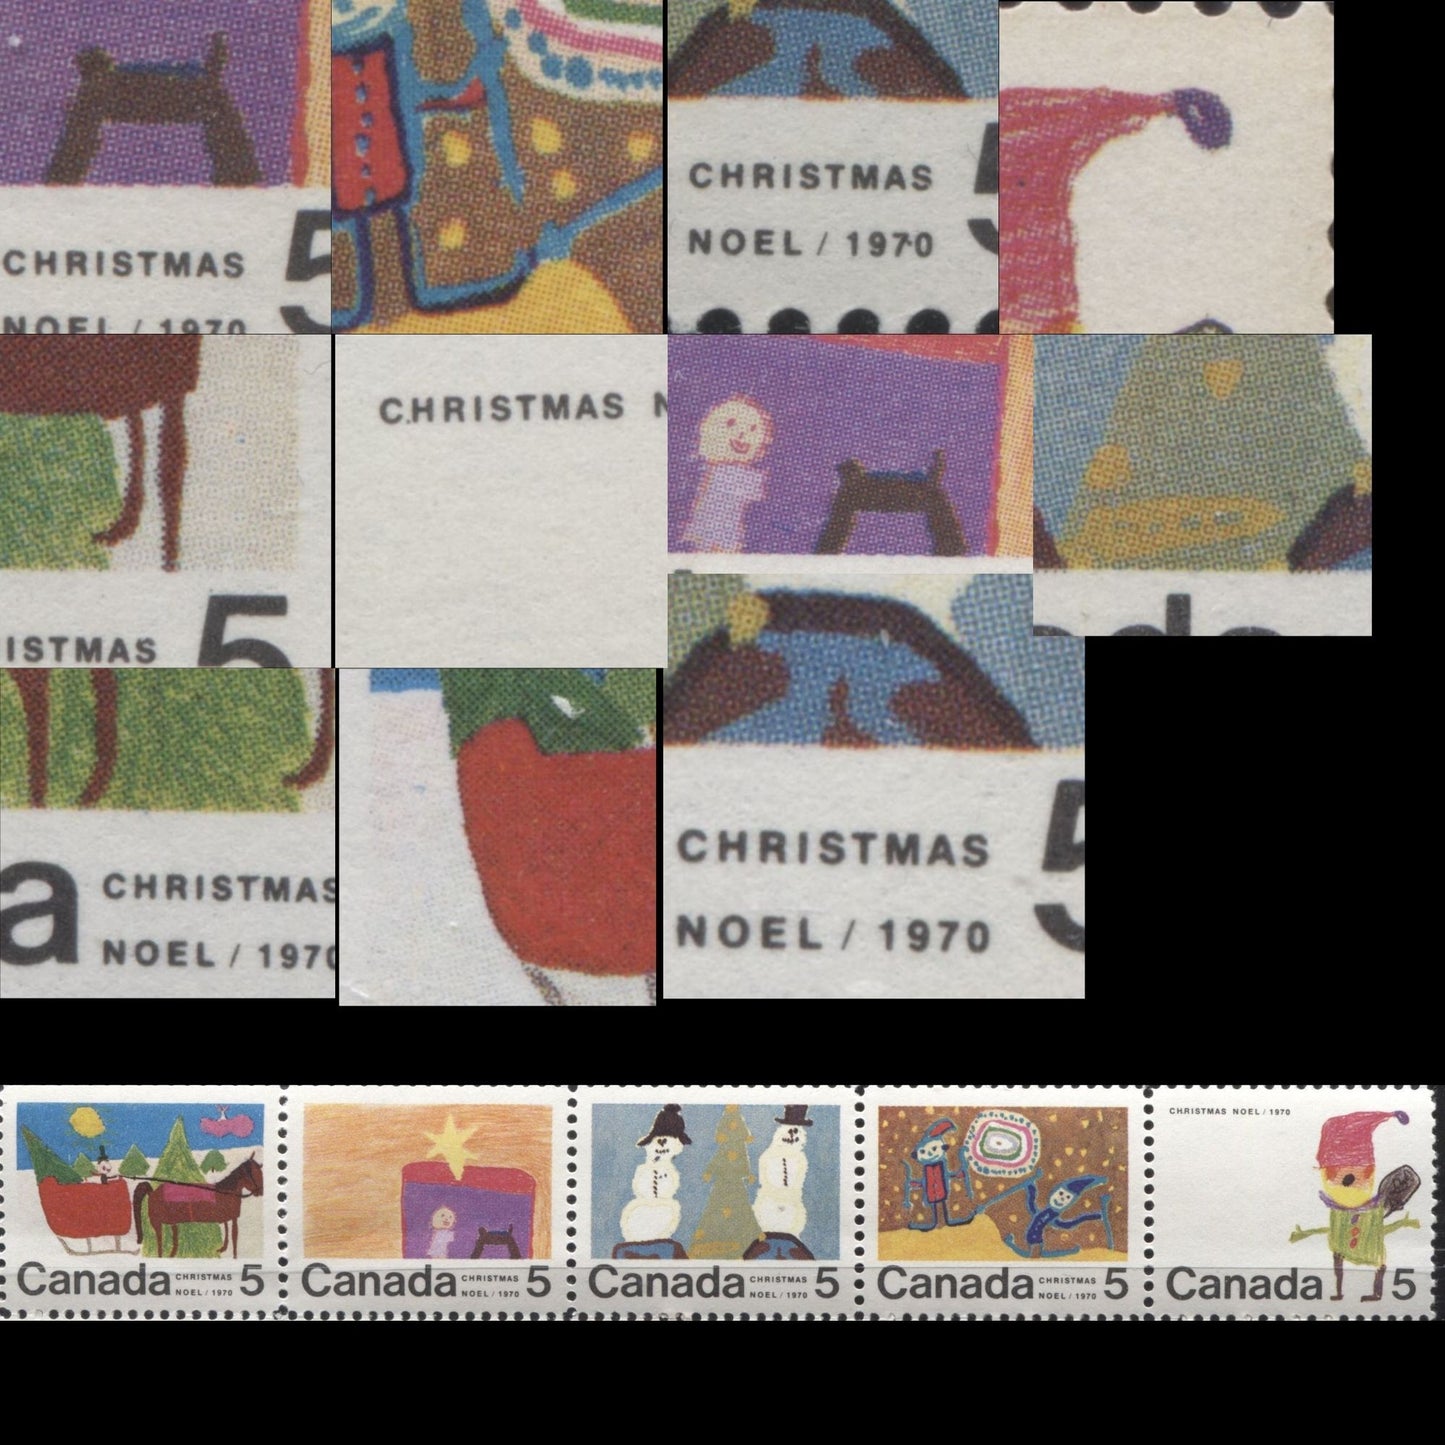 Lot 136 Canada #519/523 5c Multicoloured 1970 Christmas Issue, A Complete Set of 10 Constant Plate Varieties From Combination 7, Smooth HB11 Paper, Perf. 11.9